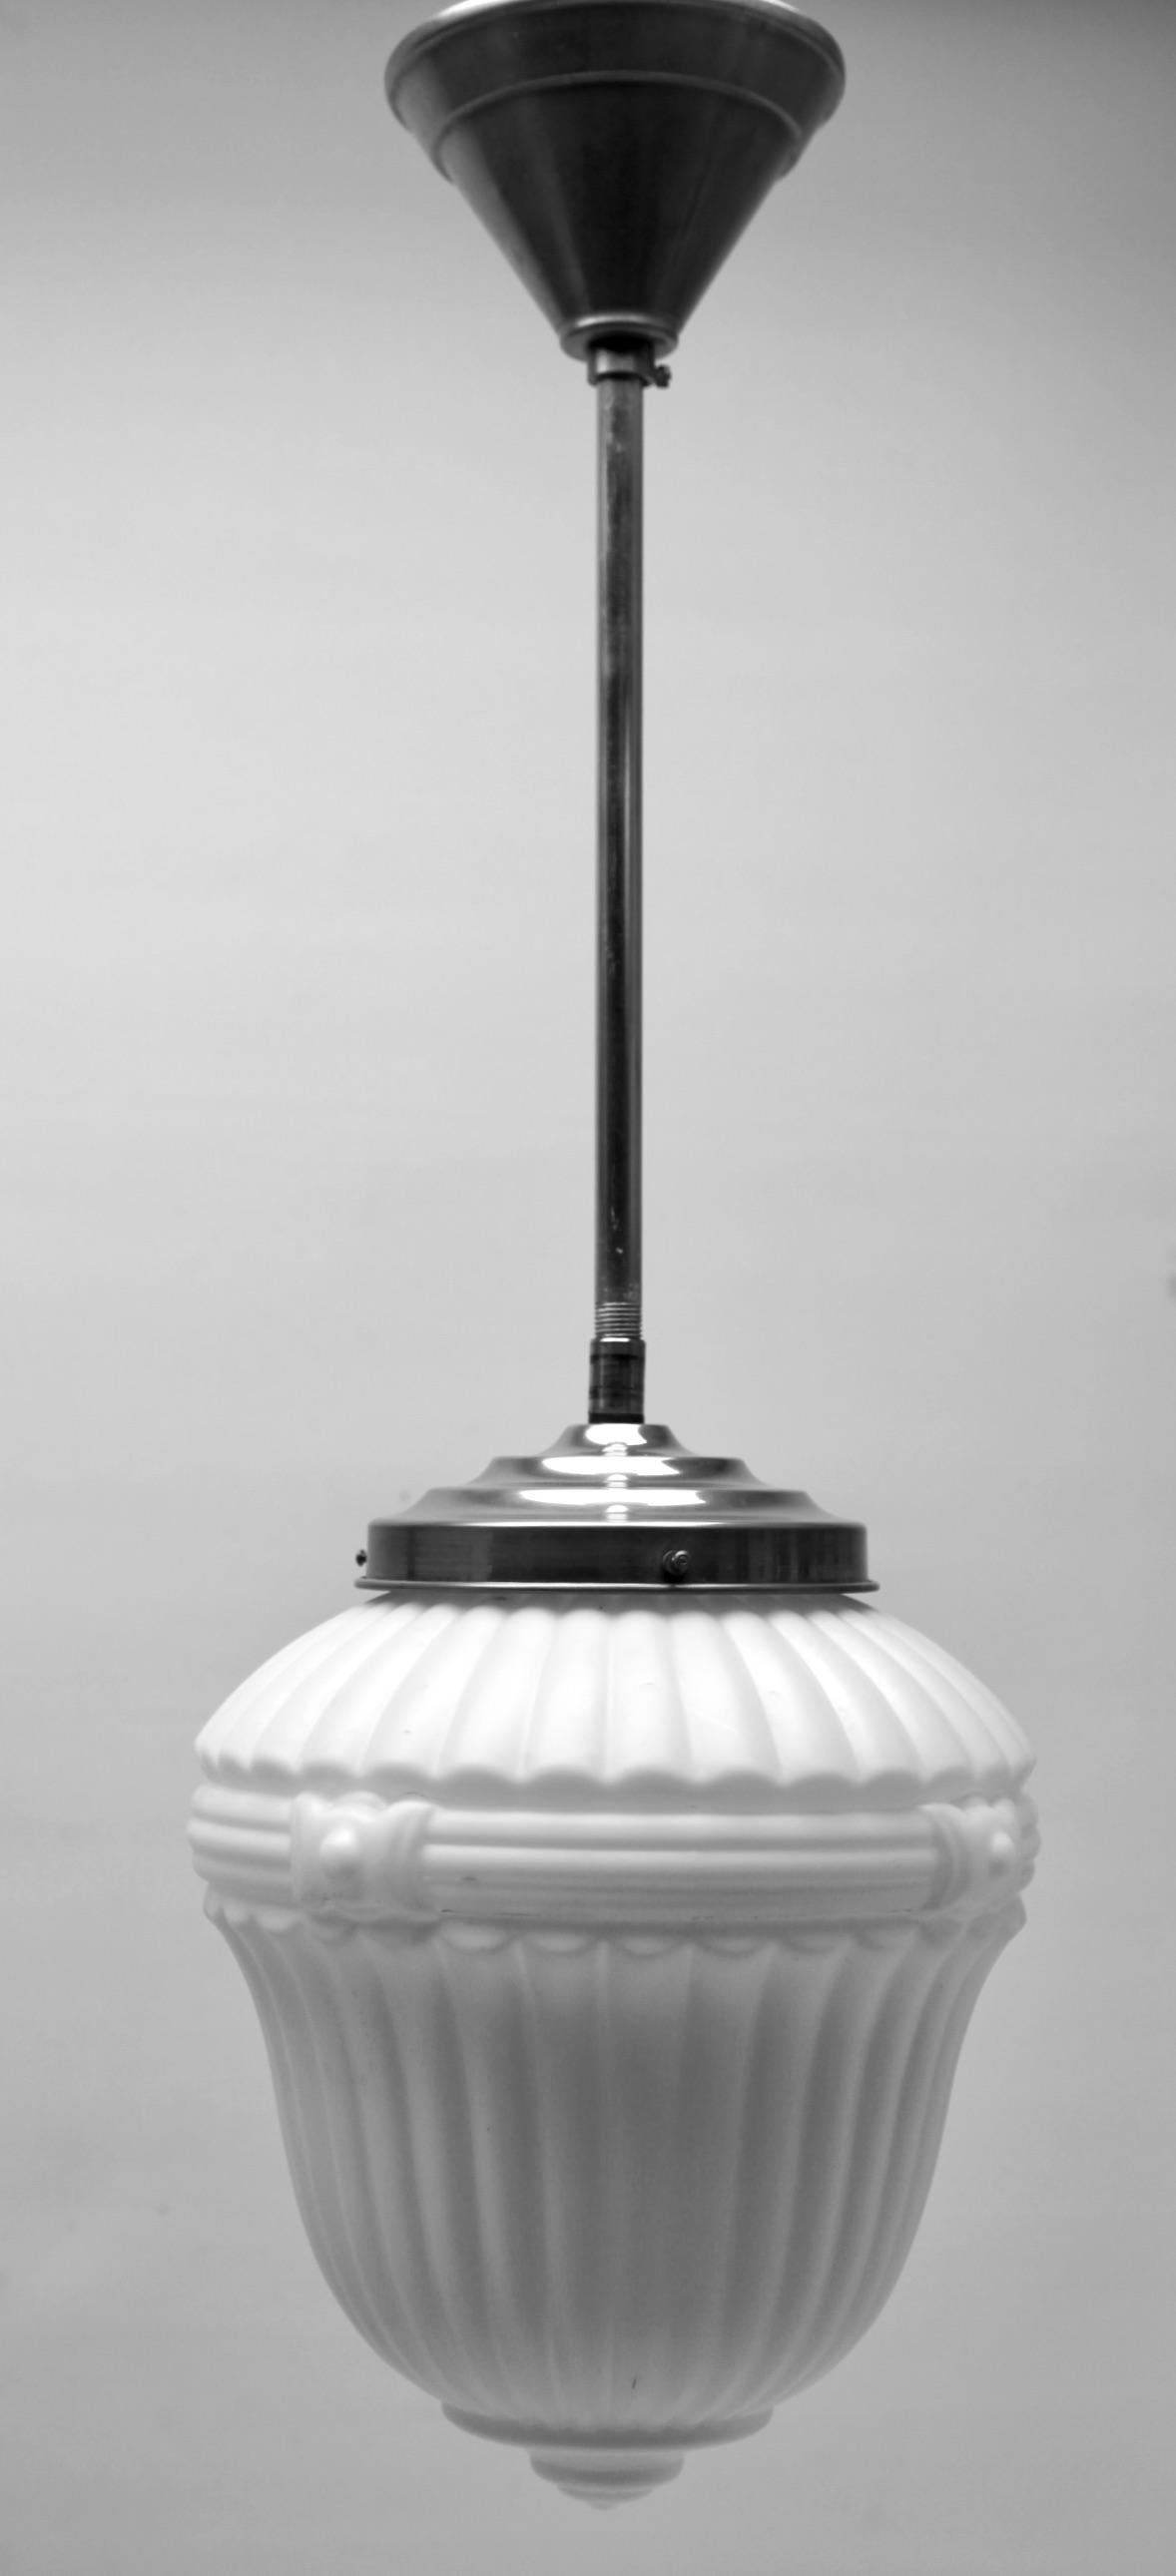 Belgian Scailmont Pendant Lamp with a Opaline Shade and Chrome Fittings, 1930s, Belgium For Sale